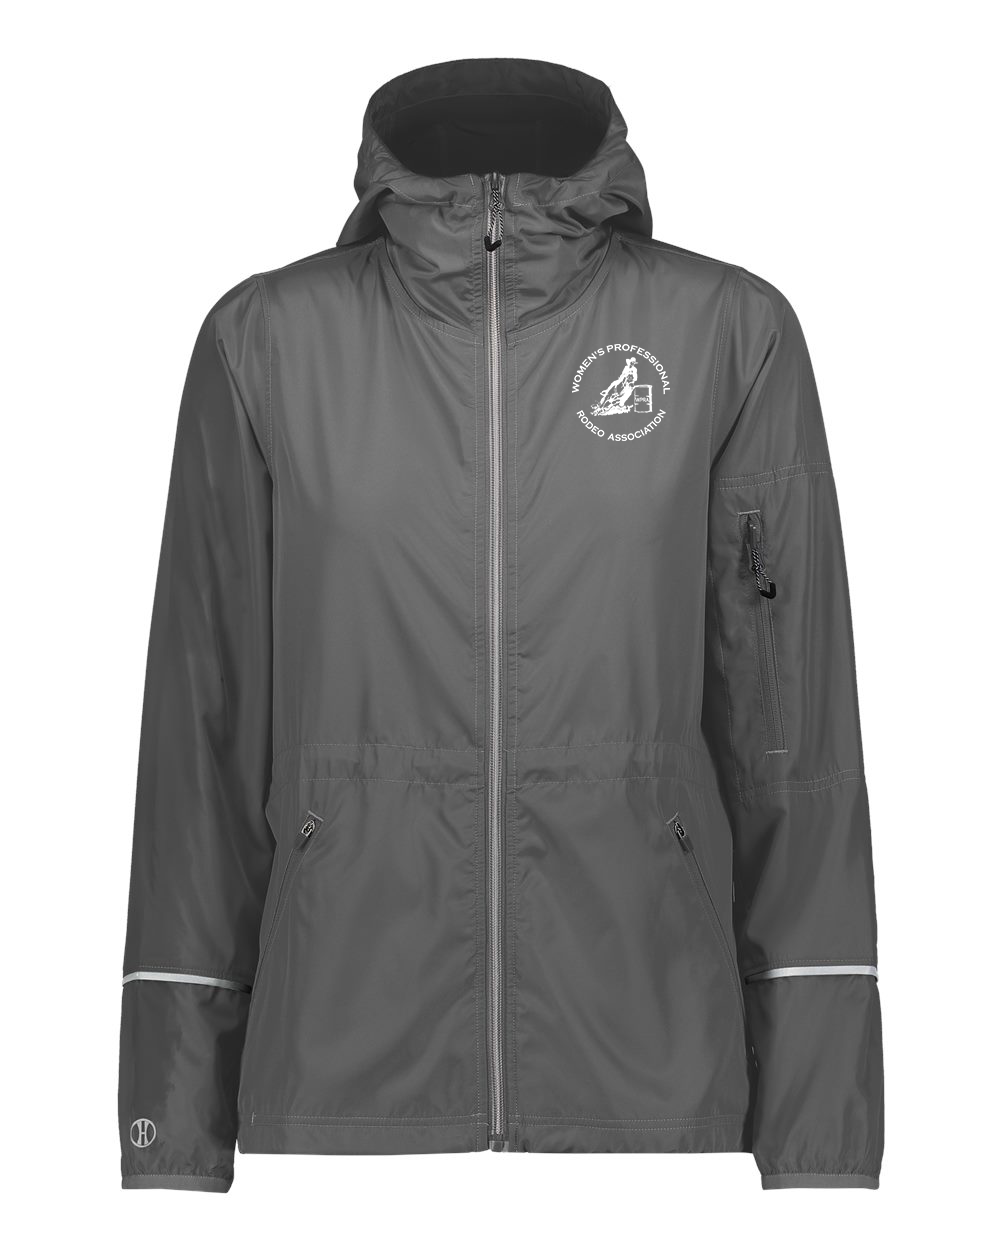 Holloway - Women's Packable Hooded Jacket